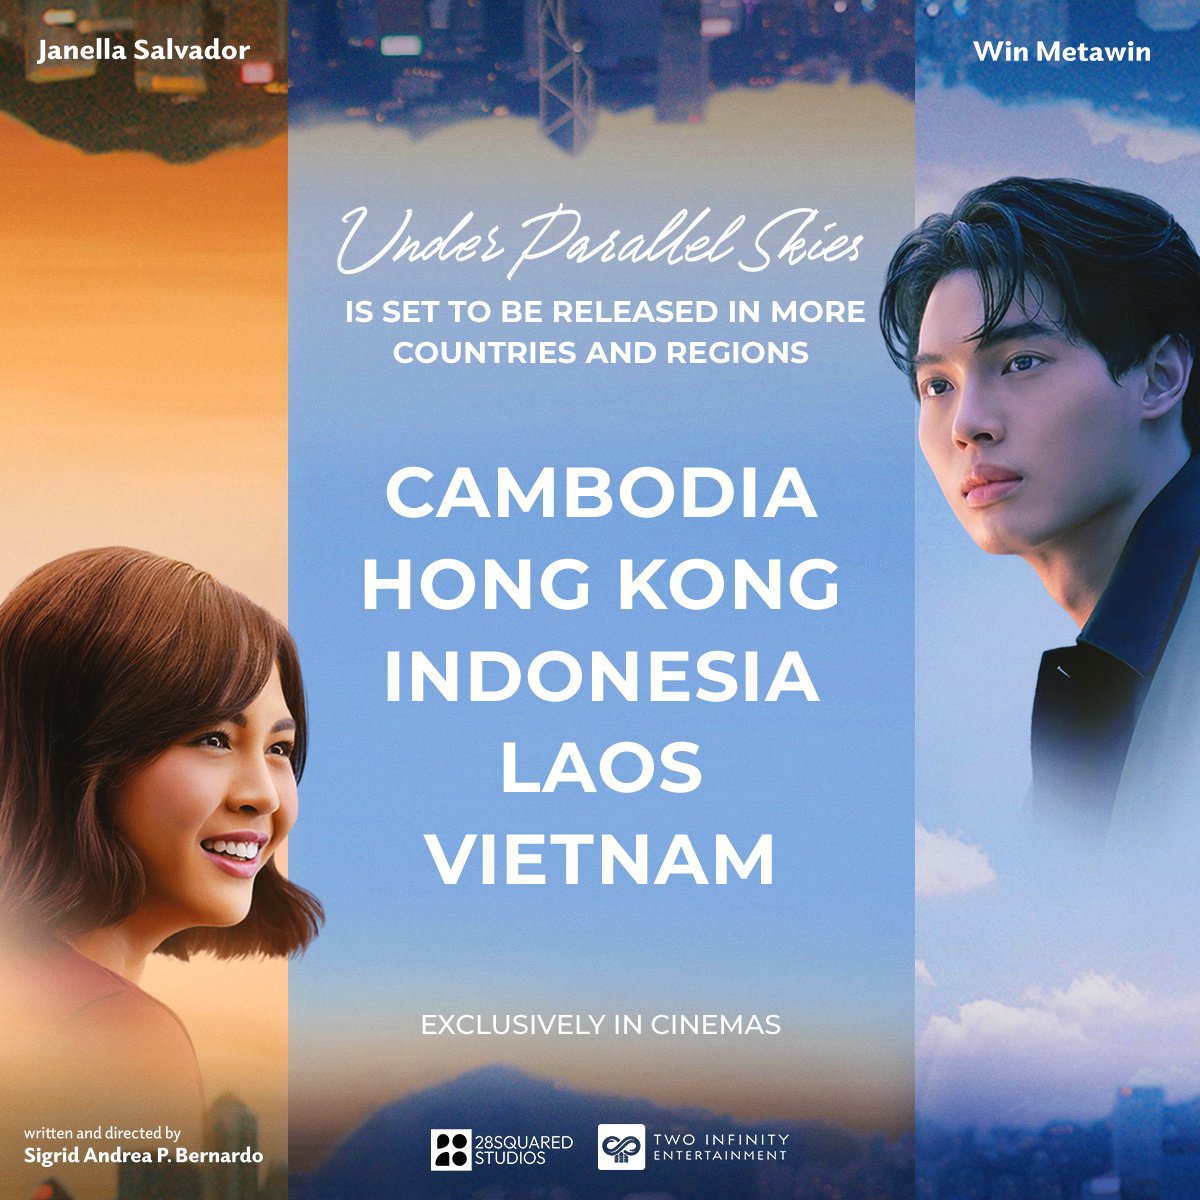 JUST IN: “Under Parallel Skies” starring Win Metawin and Janella Salvador will also be released in the following countries and regions:

➡️ Cambodia
➡️ Hong Kong
➡️ Indonesia
➡️ Laos
➡️ Vietnam

#WinMetawin #JanellaSalvador  #UnderParallelSkies

Stay tuned via @28squaredstudio